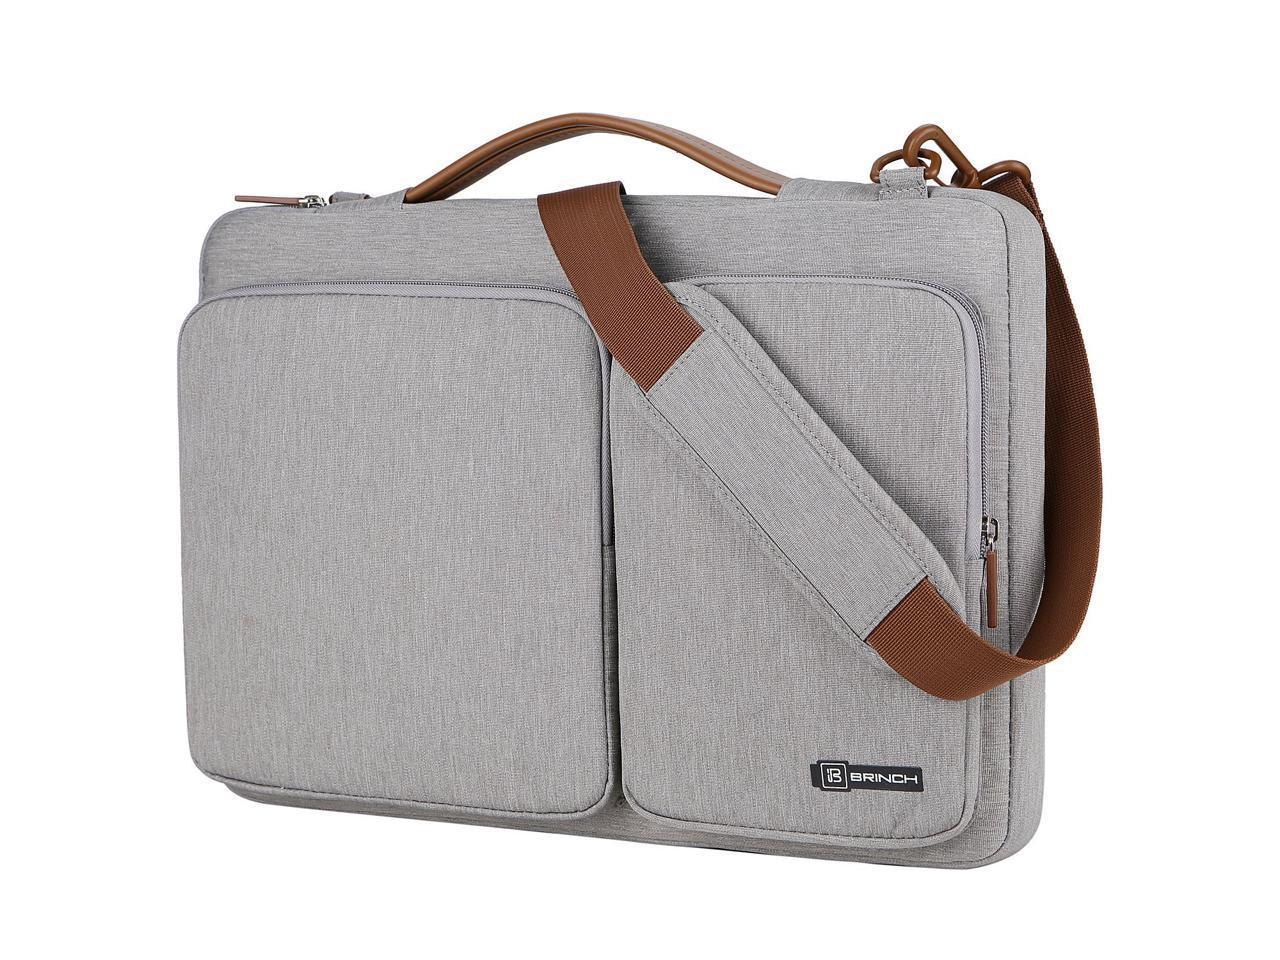 Stay Dry 13.6-Inch Laptop Case Bag